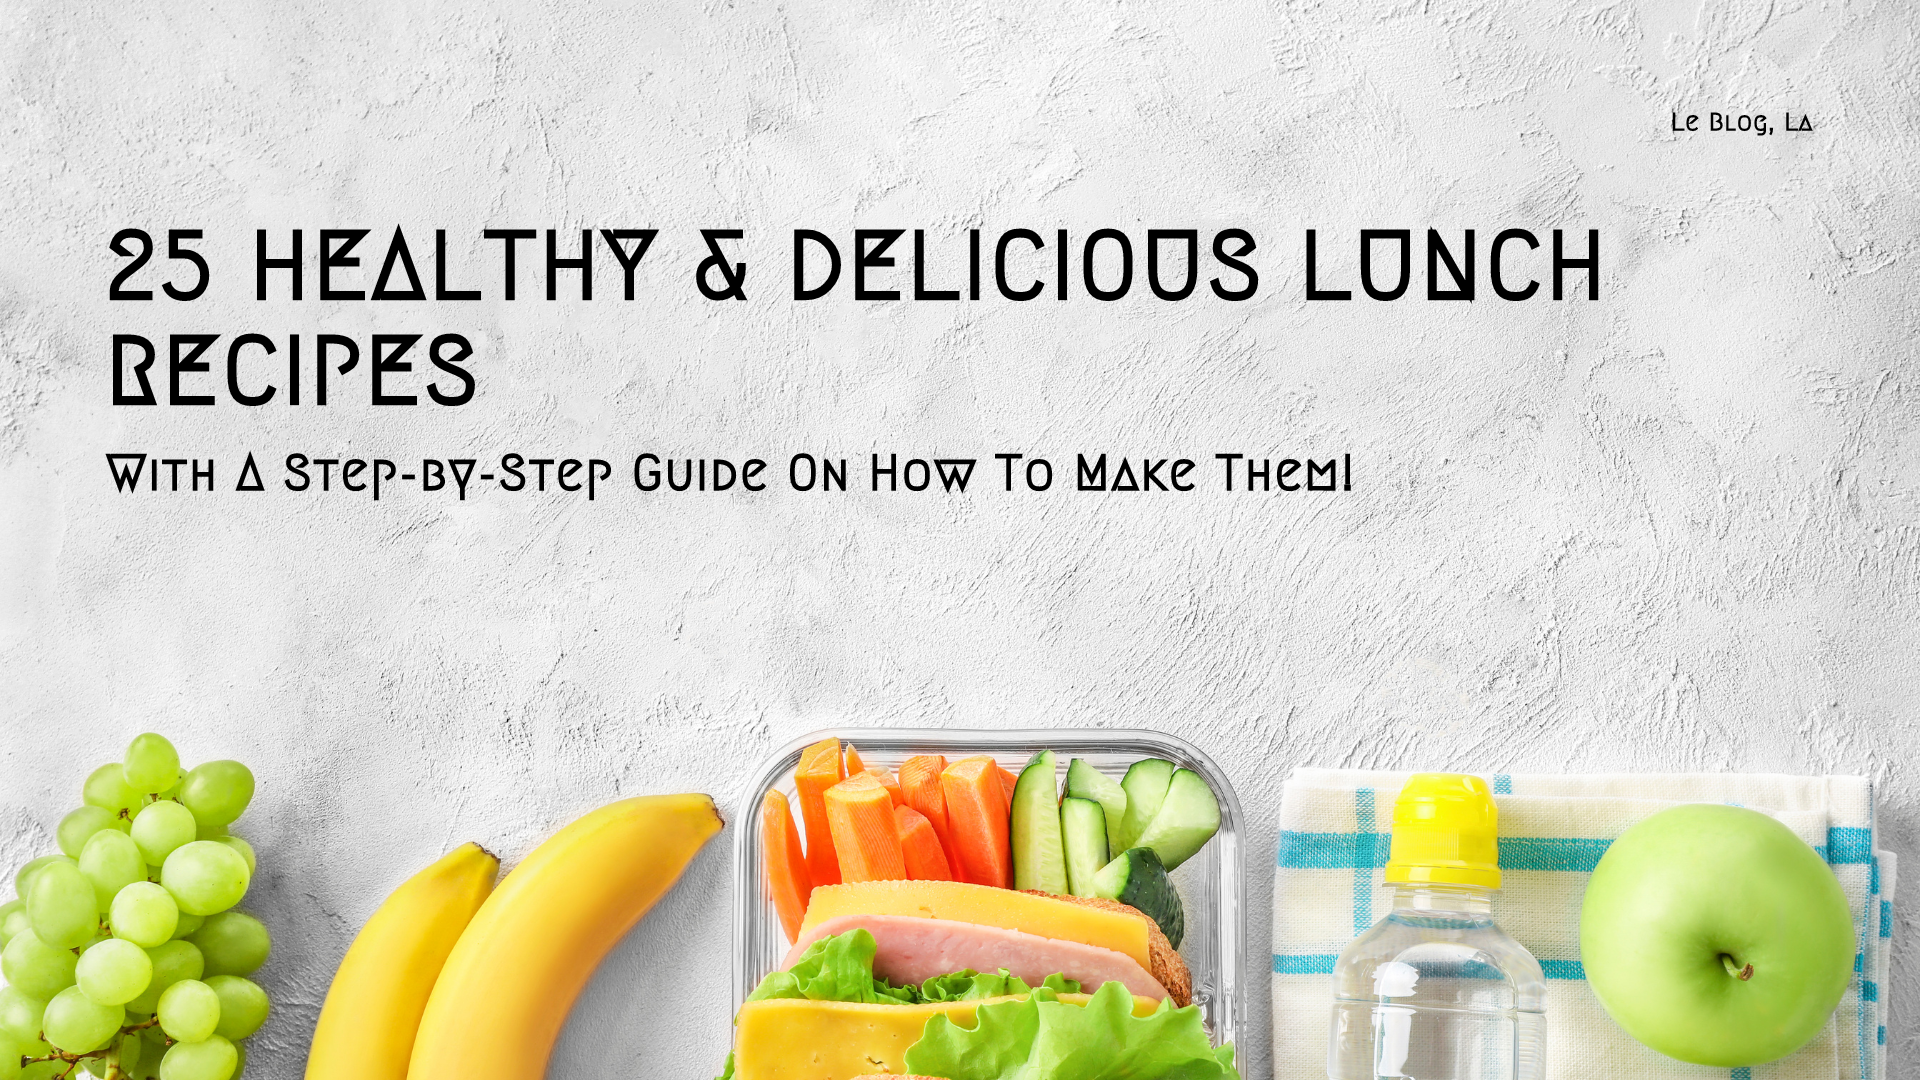 25 Healthy and Delicious Lunch Recipes: A Step-by-Step Guide